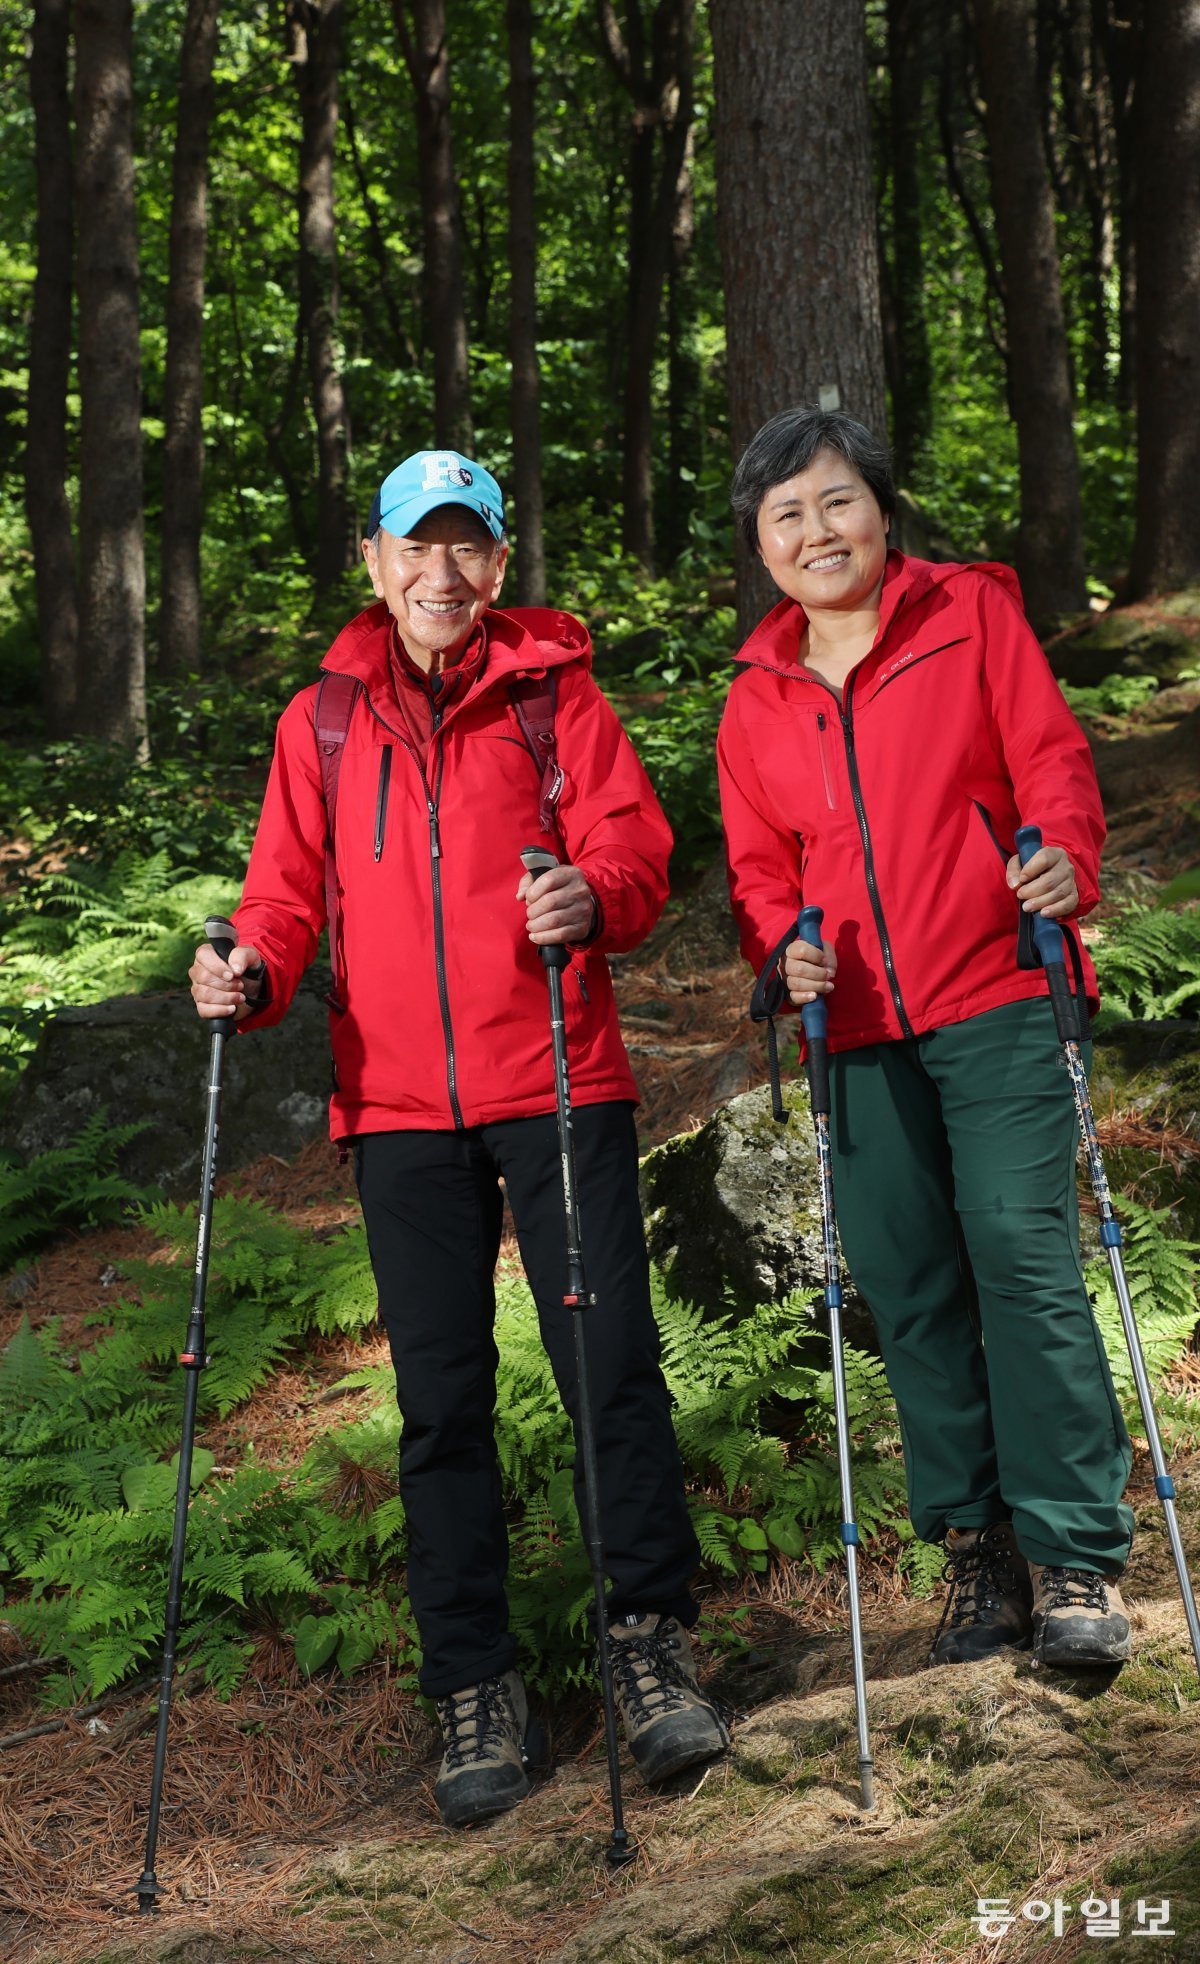 Sungkyunkwan Advisory Council Chairman Seol Kyun-tae (left) and his wife Son In-ja are smiling brightly as they climb Chukryeong Mountain in Sudong-myeon, Namyangju, Gyeonggi-do.  Chairman Seol, who started mountain climbing in 1974 and has been managing his health, moved to Sudong-myeon, Namyangju three years ago and climbs the mountain every day with his wife.  Namyangju = Reporter Shin Won-geon laputa@donga.com